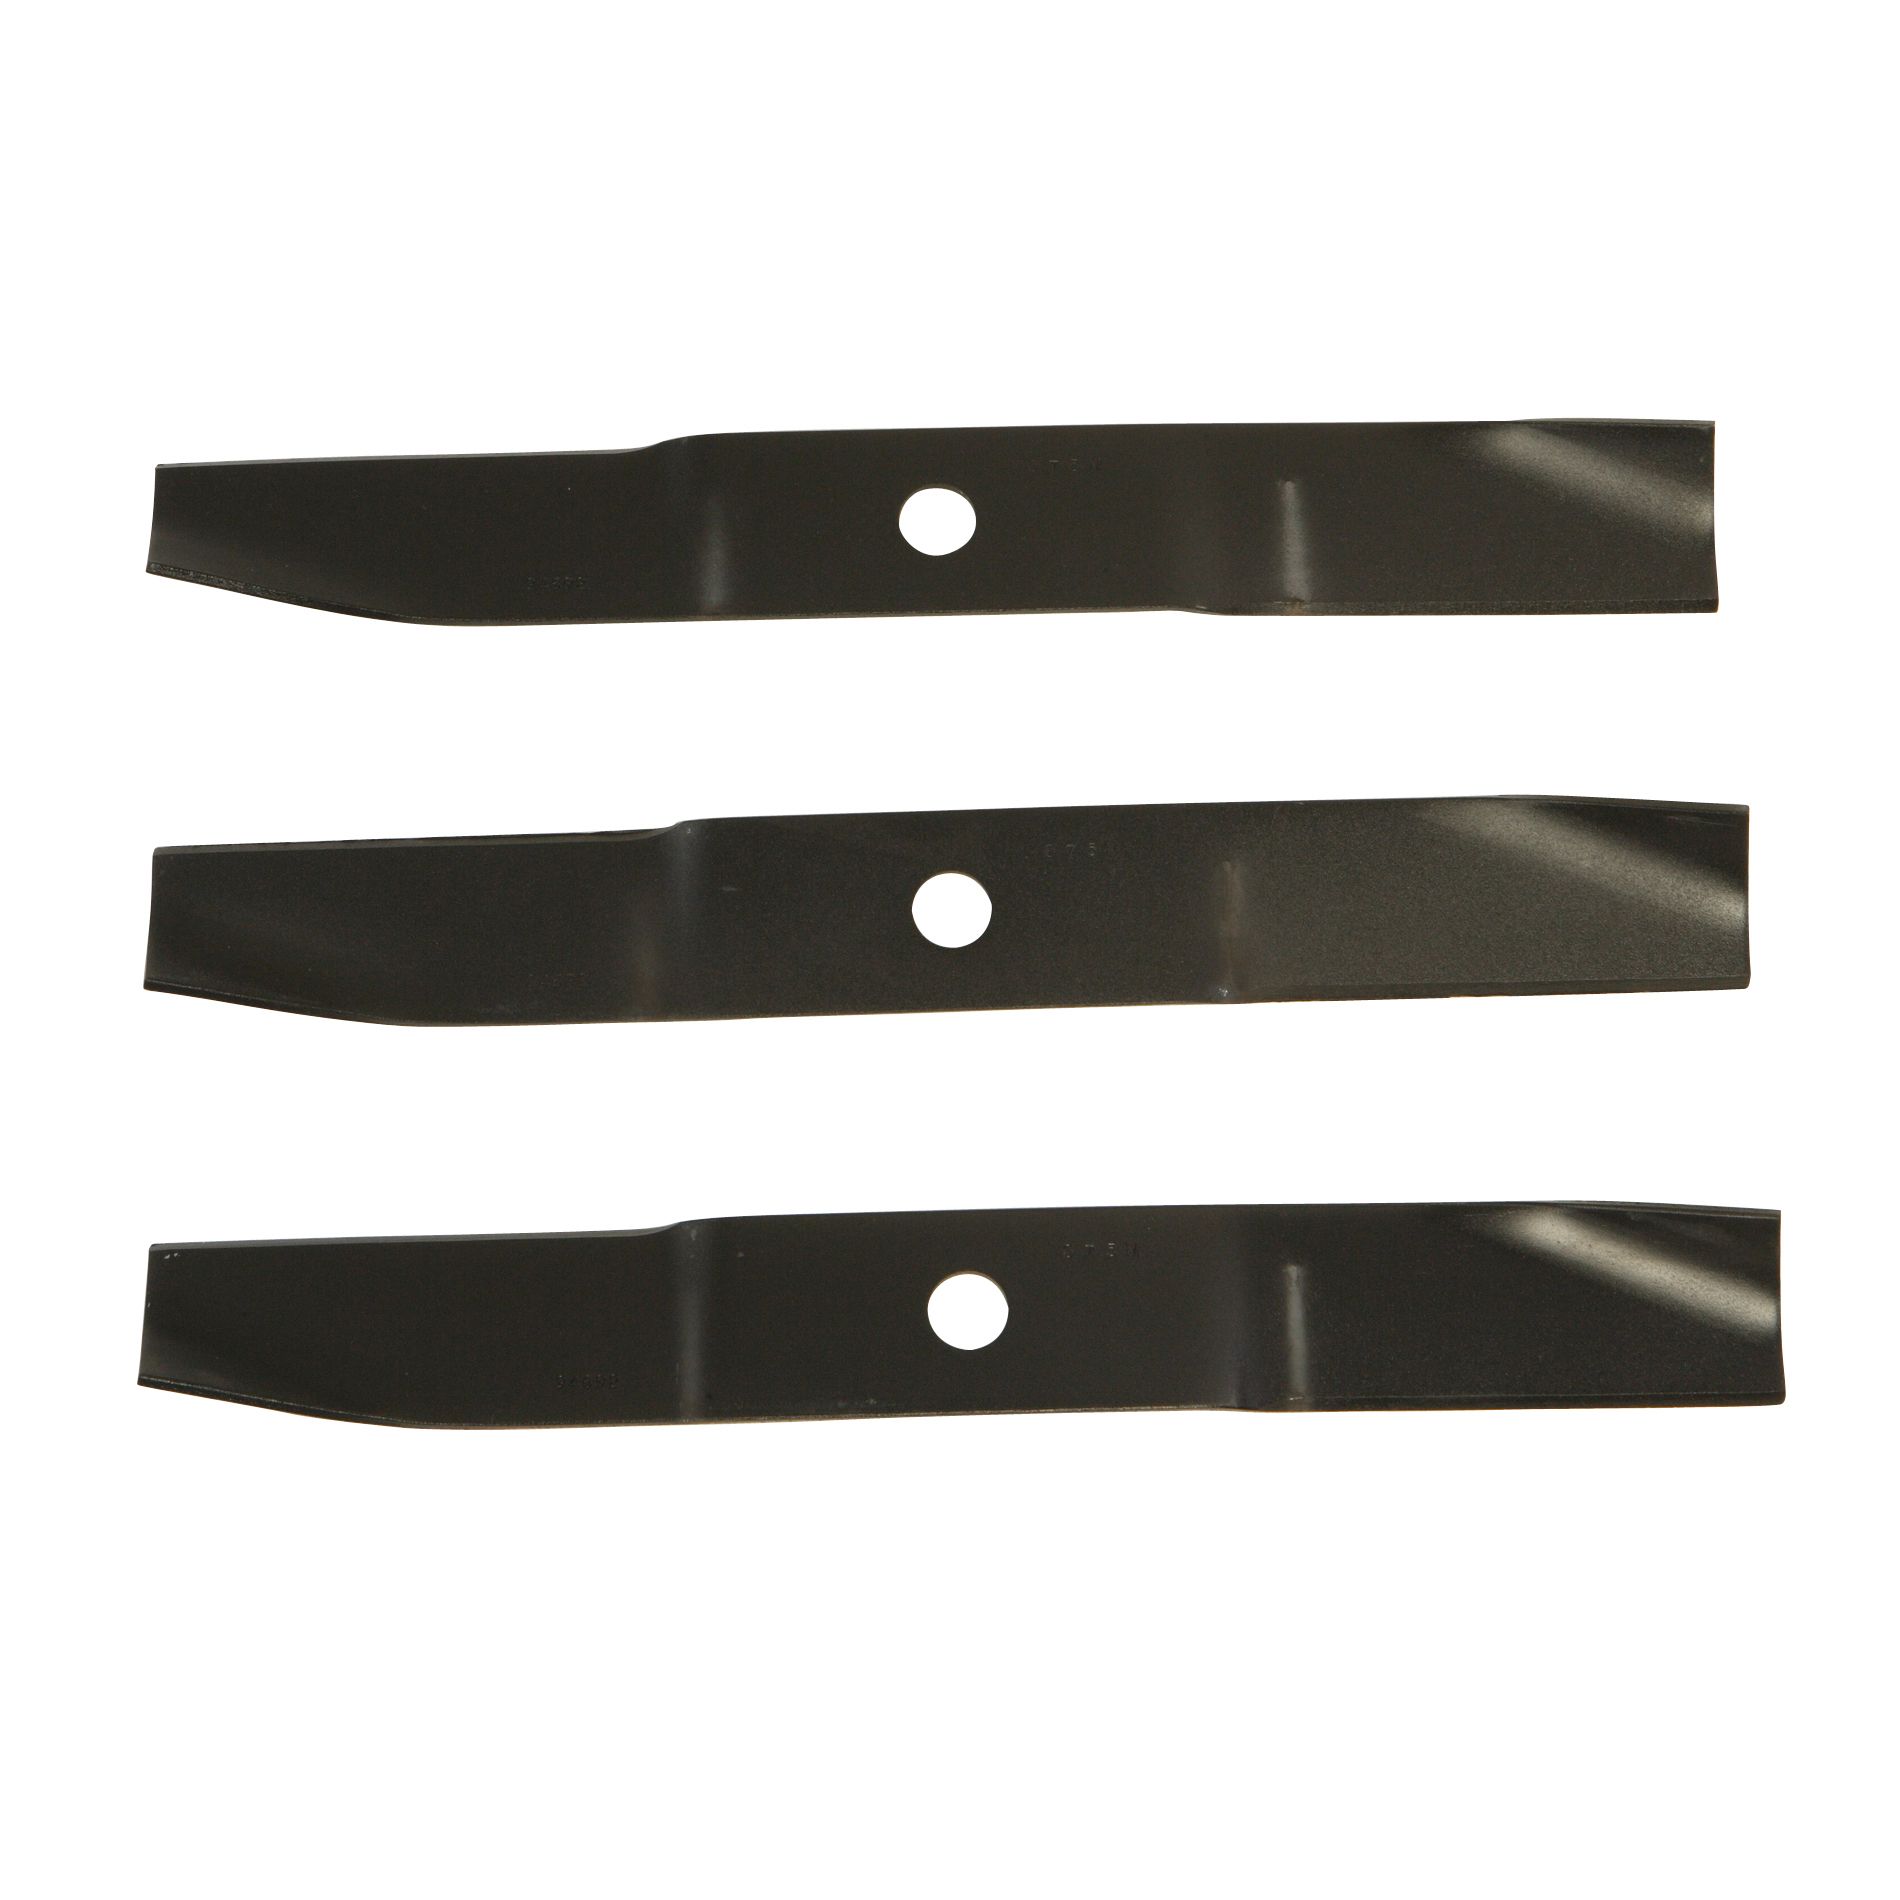 Briggs & Stratton 1687572 Replacement Blades for 46 in. Deck